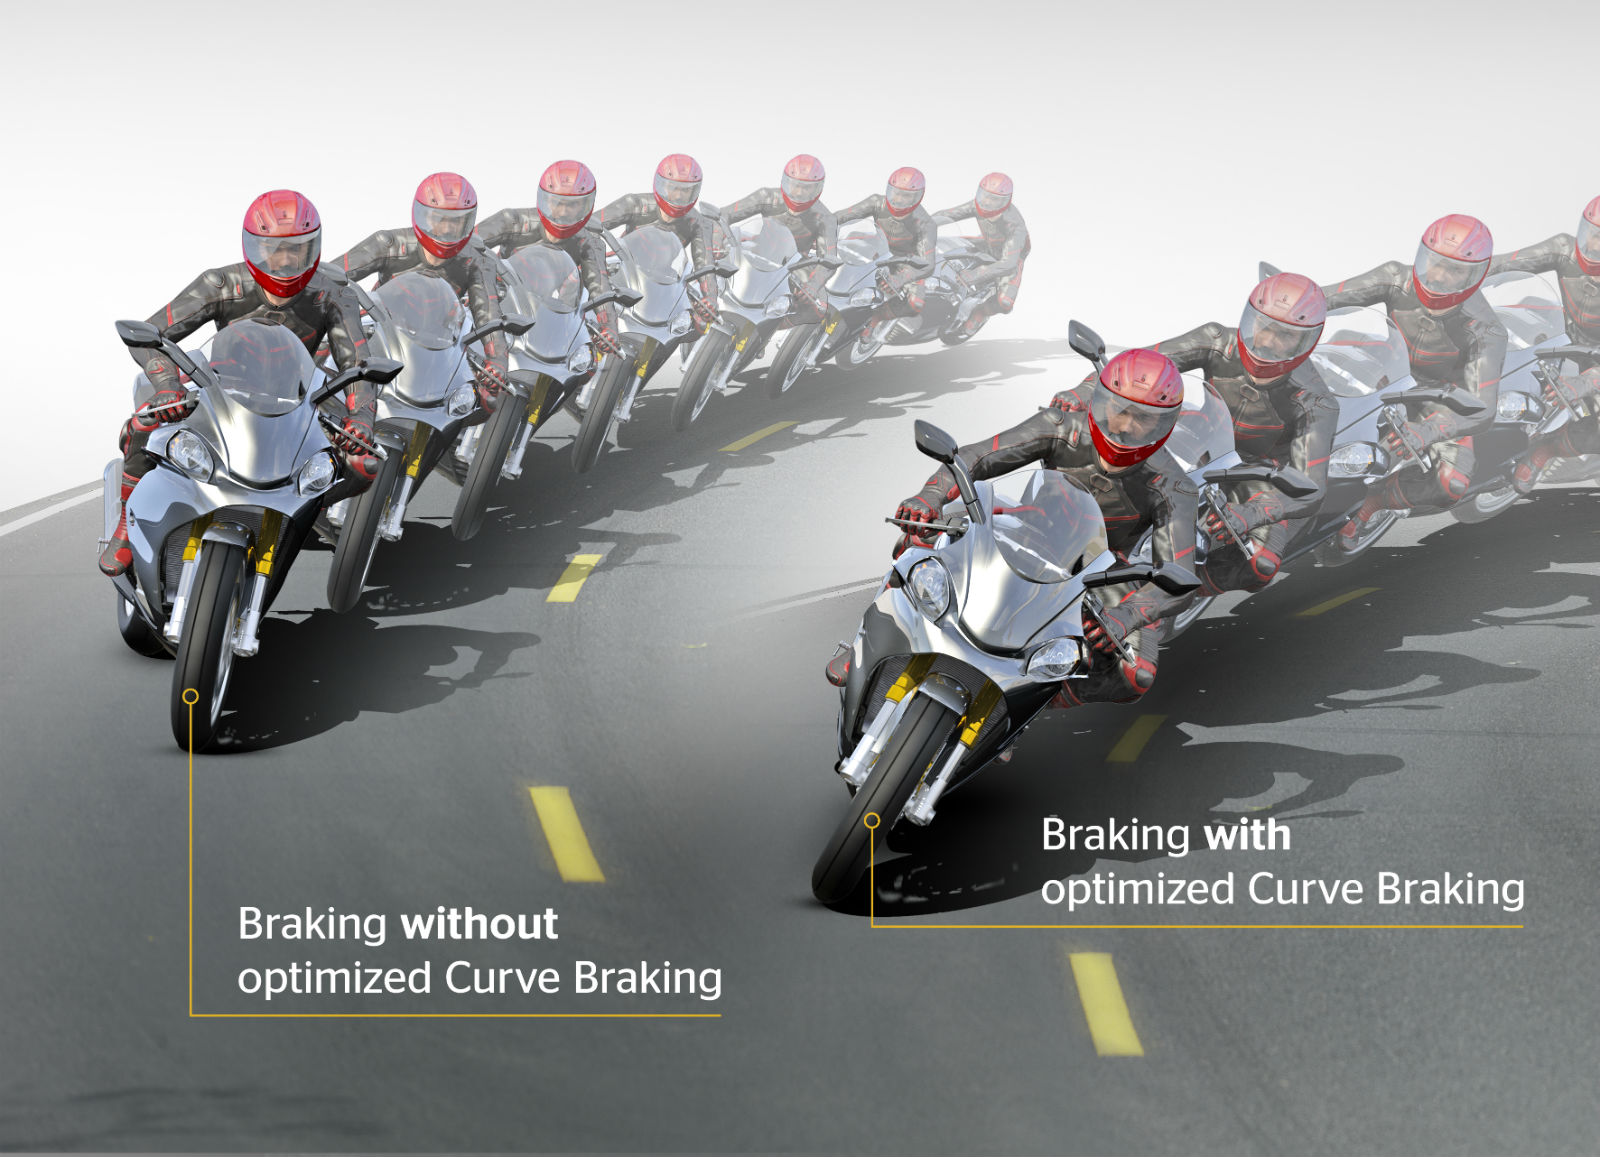 Continental develops cornering ABS for motorcycles